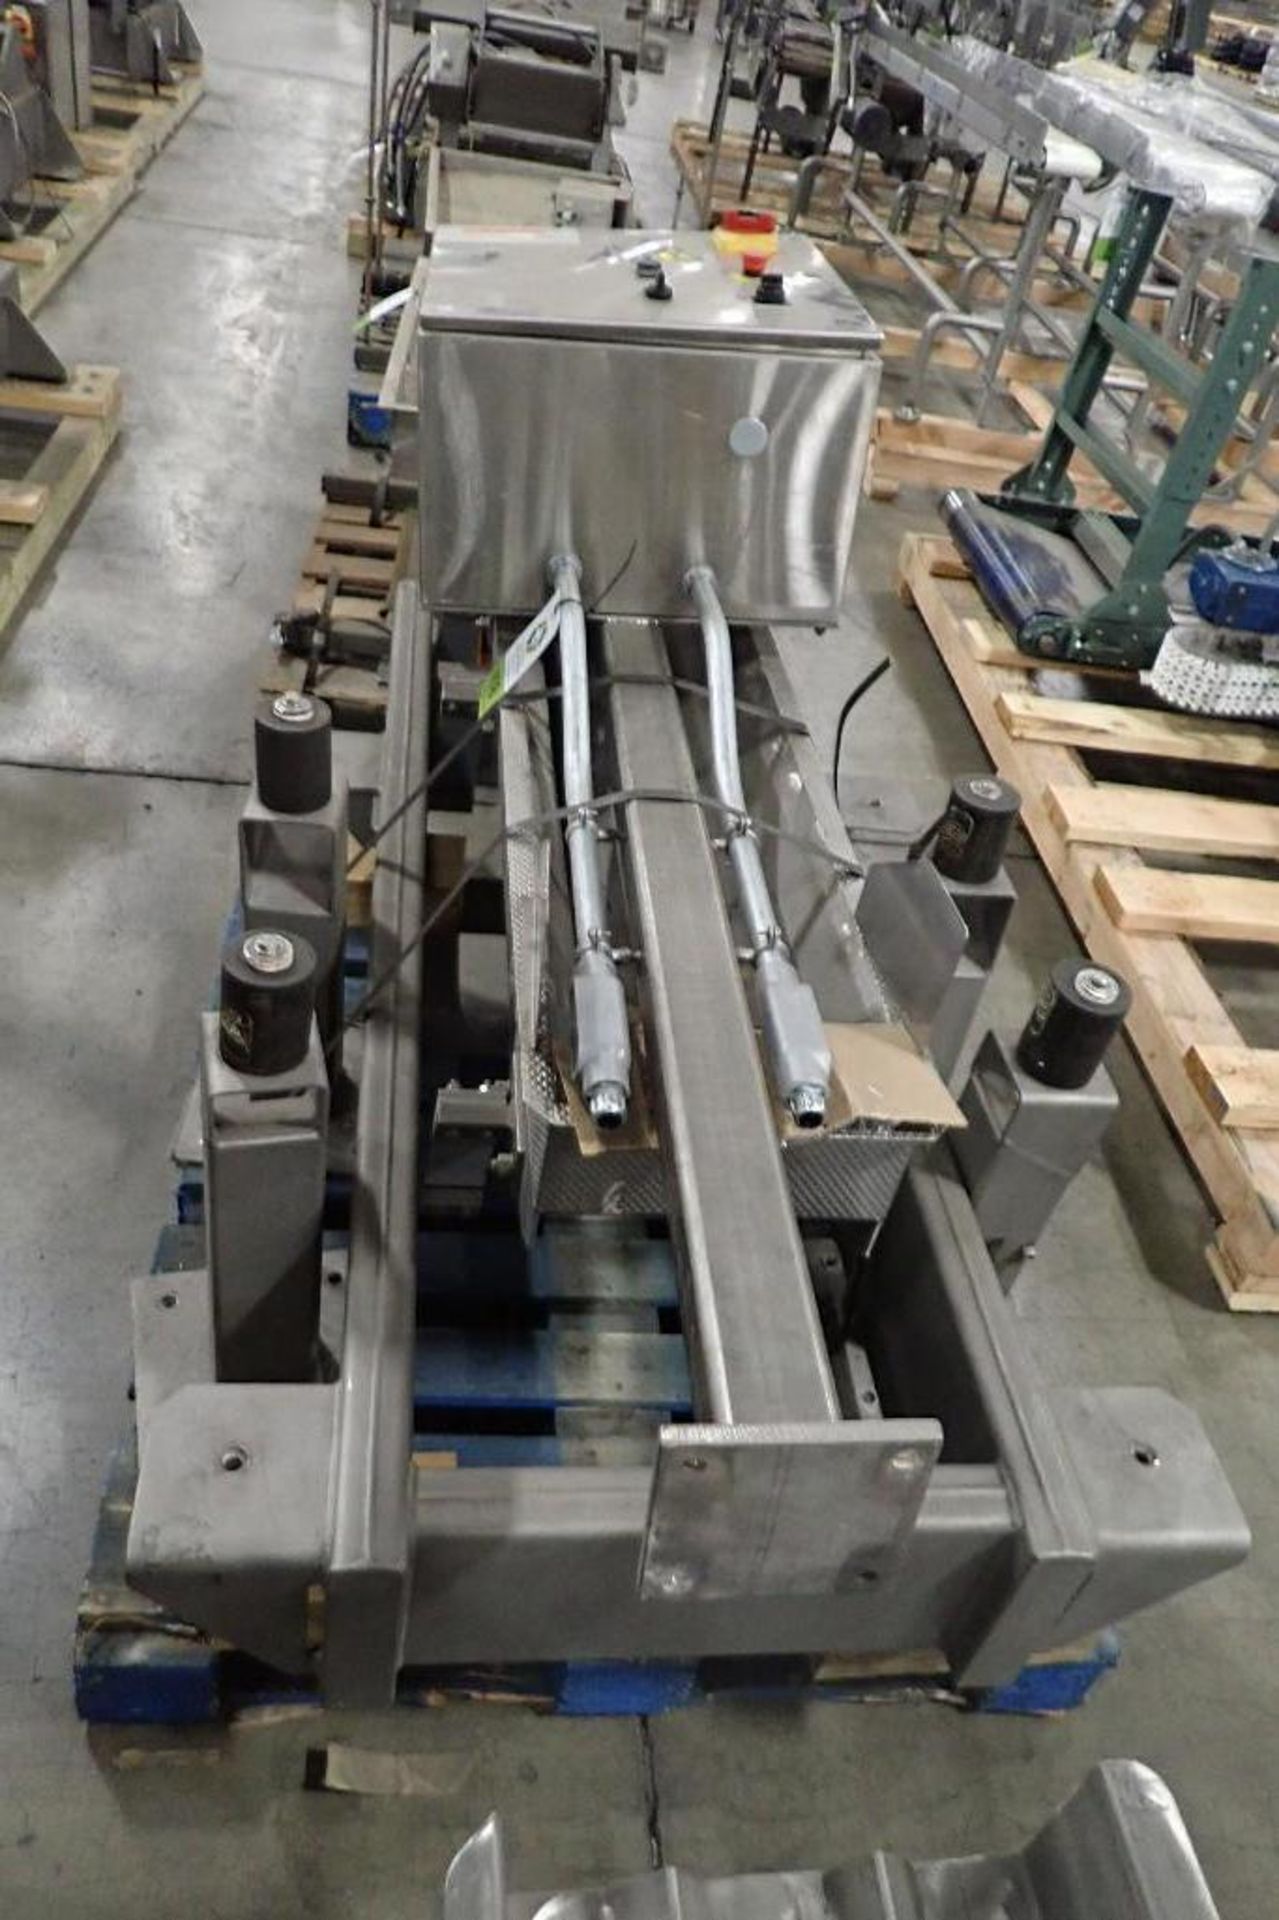 Key iso flow vibratory alignment conveyor, Model 434937-1, SN 06-153782, SS bed 60 in. long x 12 in. - Image 3 of 8